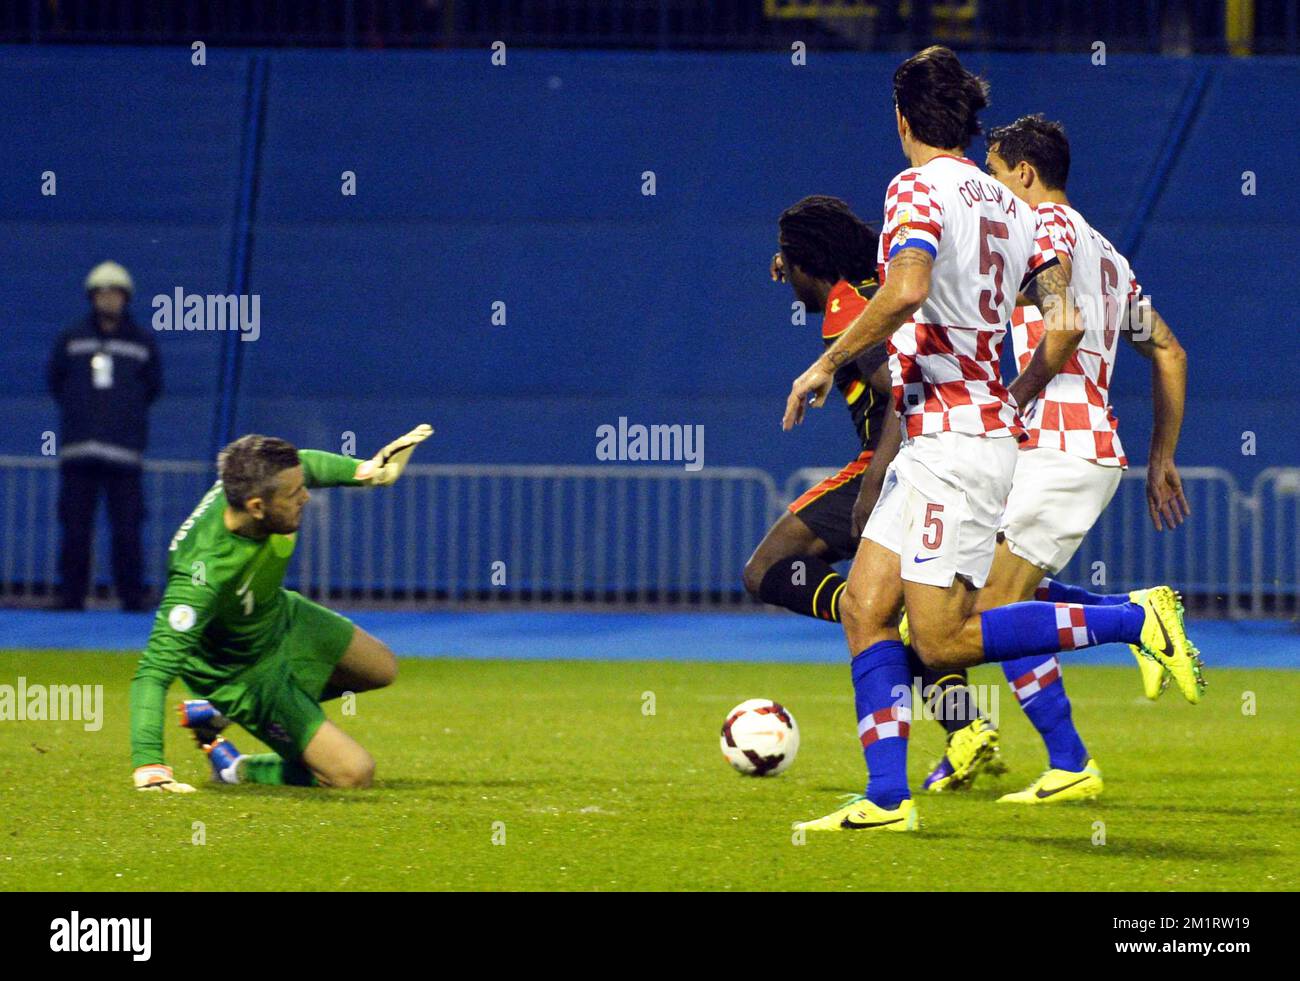 20131011 - ZAGREB, CROATIA: Belgium's Romelu Lukaku passes Croatia's goalkeeper Stipe Pletikosa and scores the 0-1 goal during a soccer game between Belgian national team The Red Devils and the Croatian national team in the Maksimir stadium in Zagreb, Croatia, Friday 11 October 2013, a qualification game for the 2014 FIFA World Cup. With two games to play the Red Devils are leading group A, they need one more point to qualify for the World Cup as group winner.   BELGA PHOTO ERIC LALMAND Stock Photo